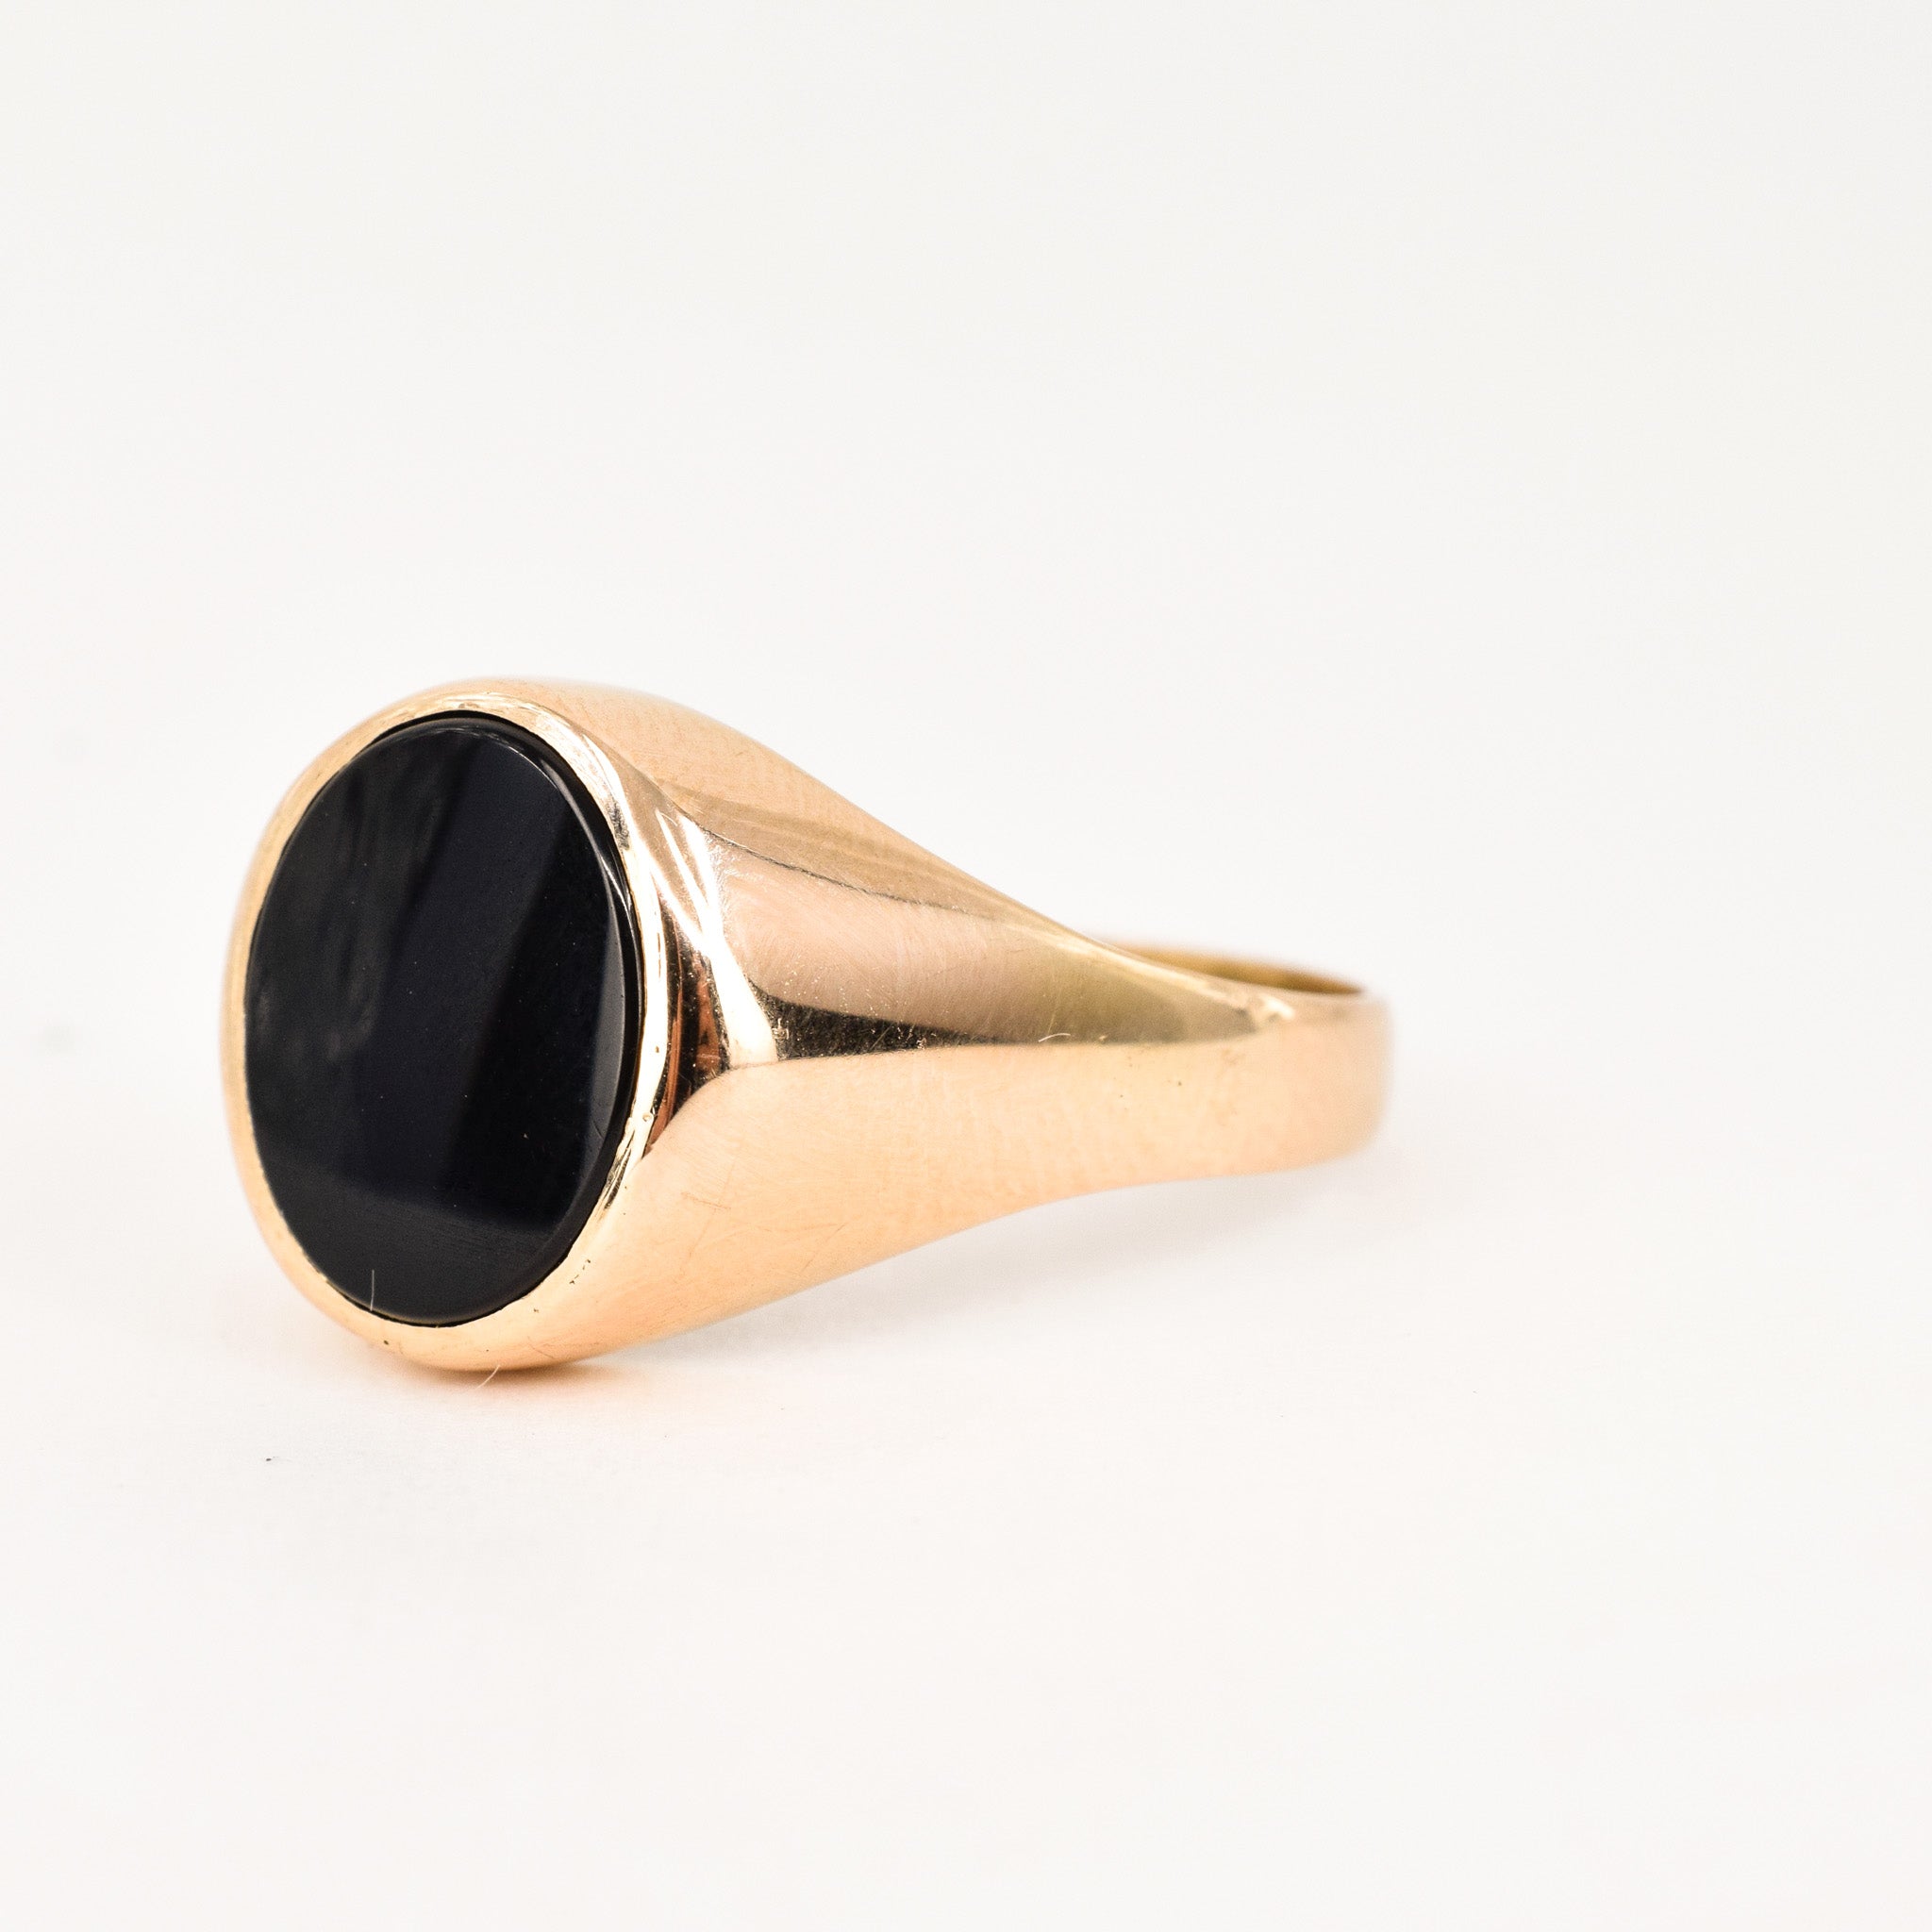 vintage gold onyx ring, folklor vintage jewelry canada